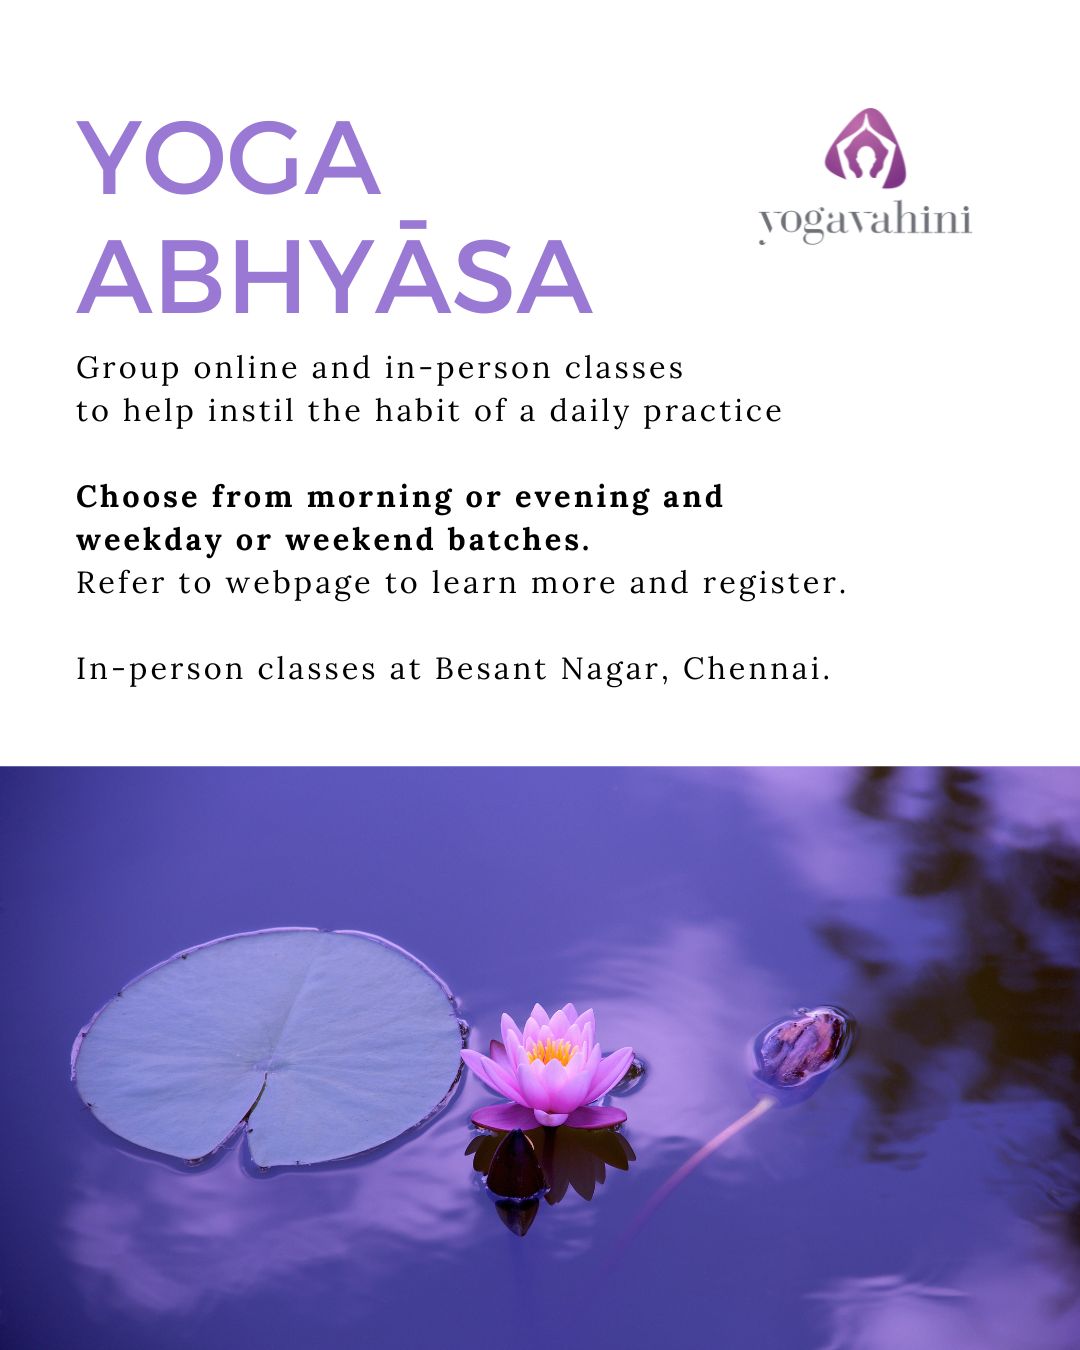 group yoga classes online and in-person (chennai)